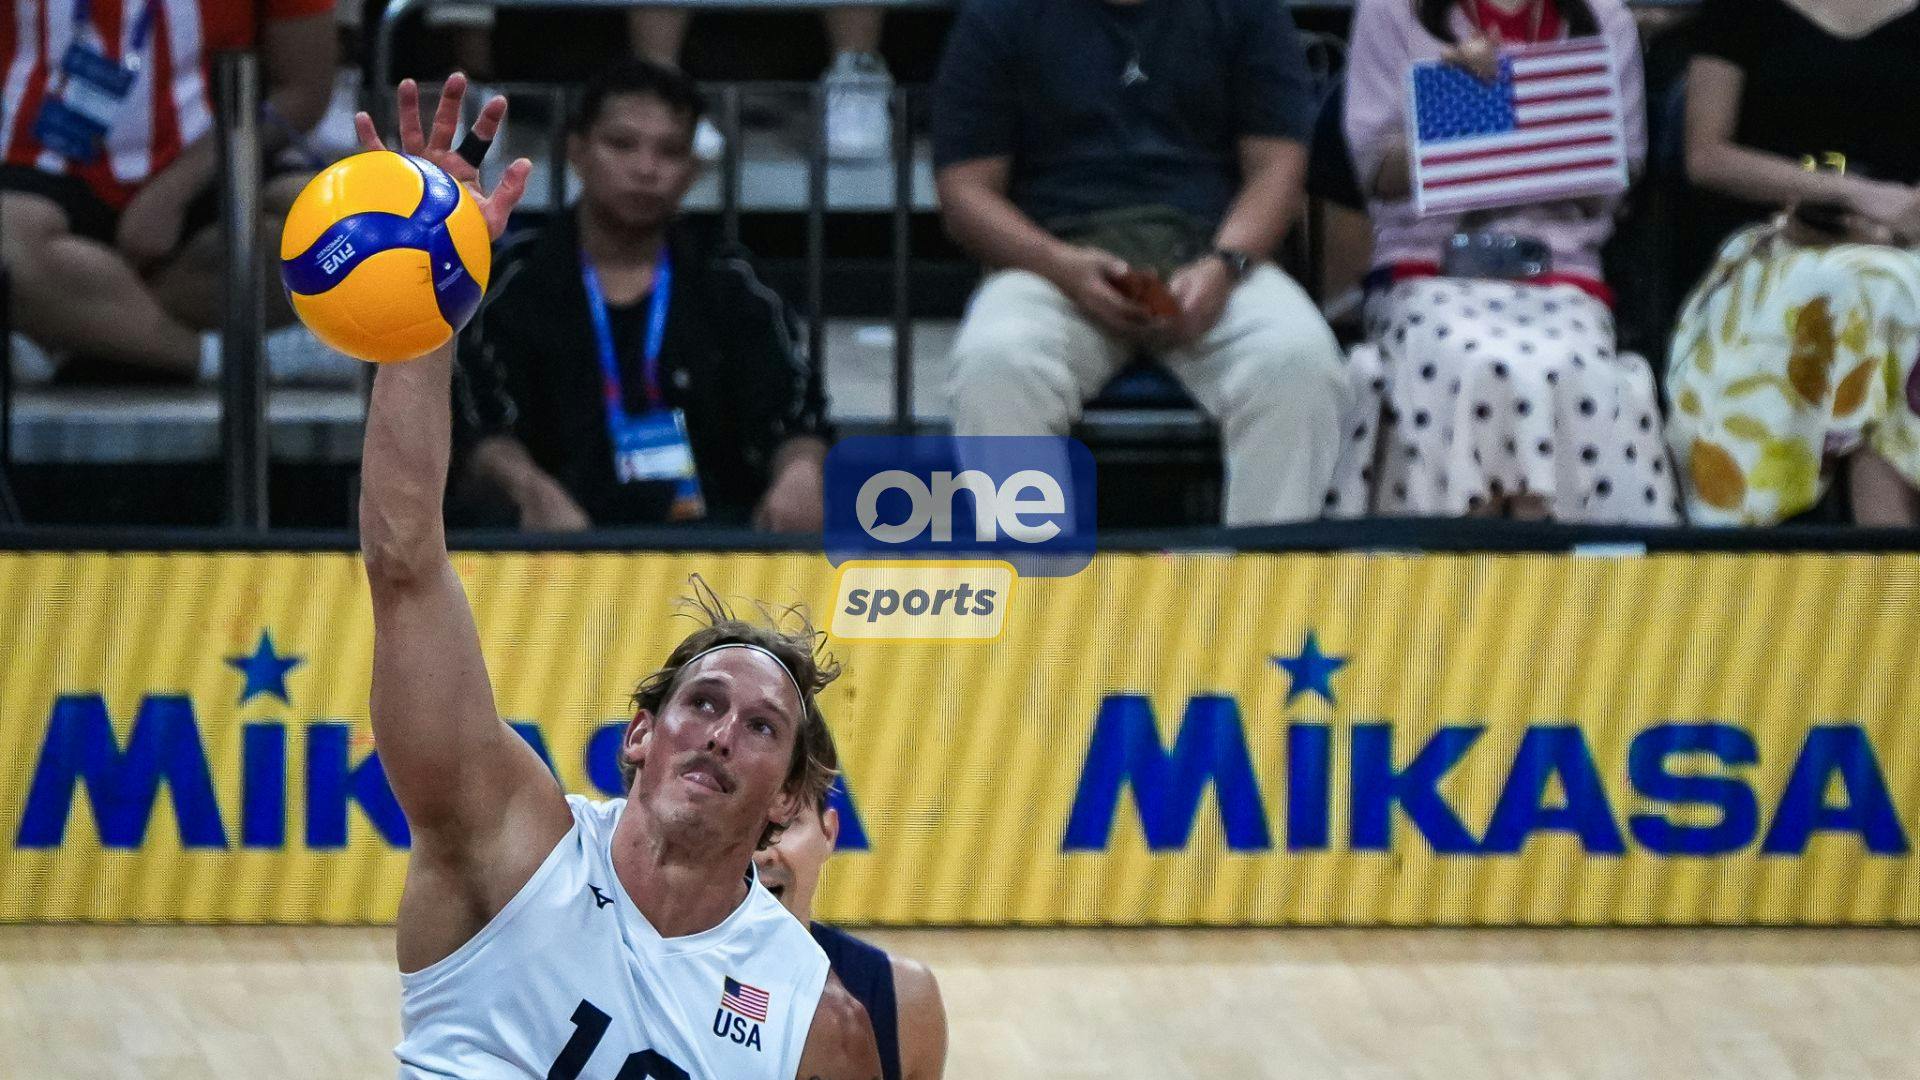 VNL: USA’s Taylor Averill hopes to try one very Filipino thing during their stay in Manila